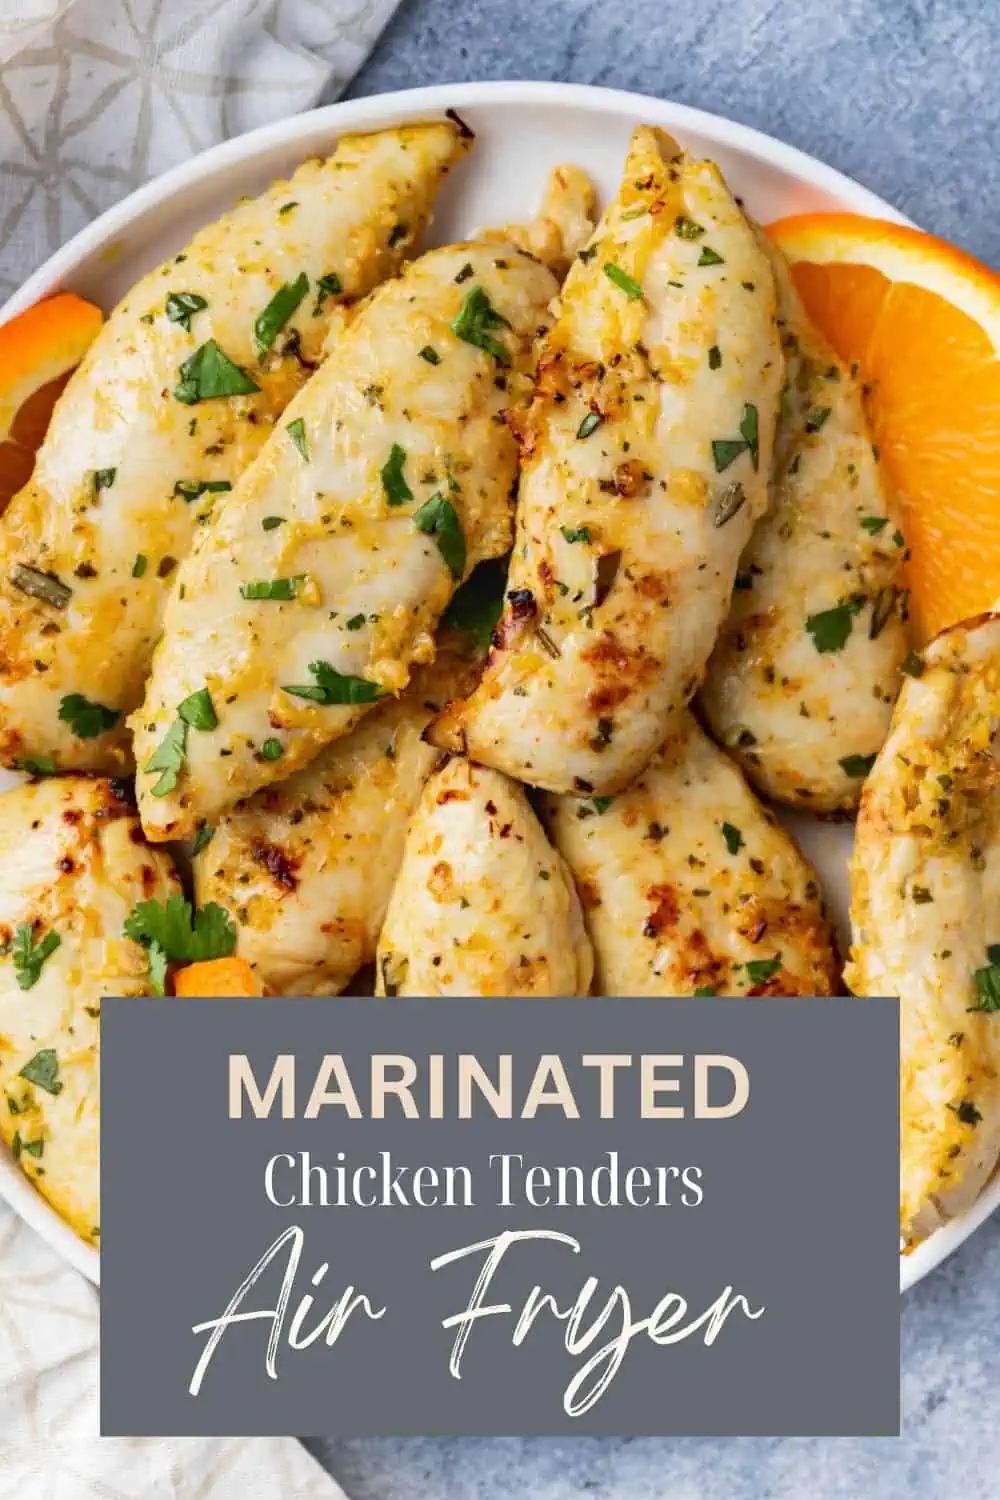 Marinated chicken tenders in an air fryer sprinkled with fresh herbs.